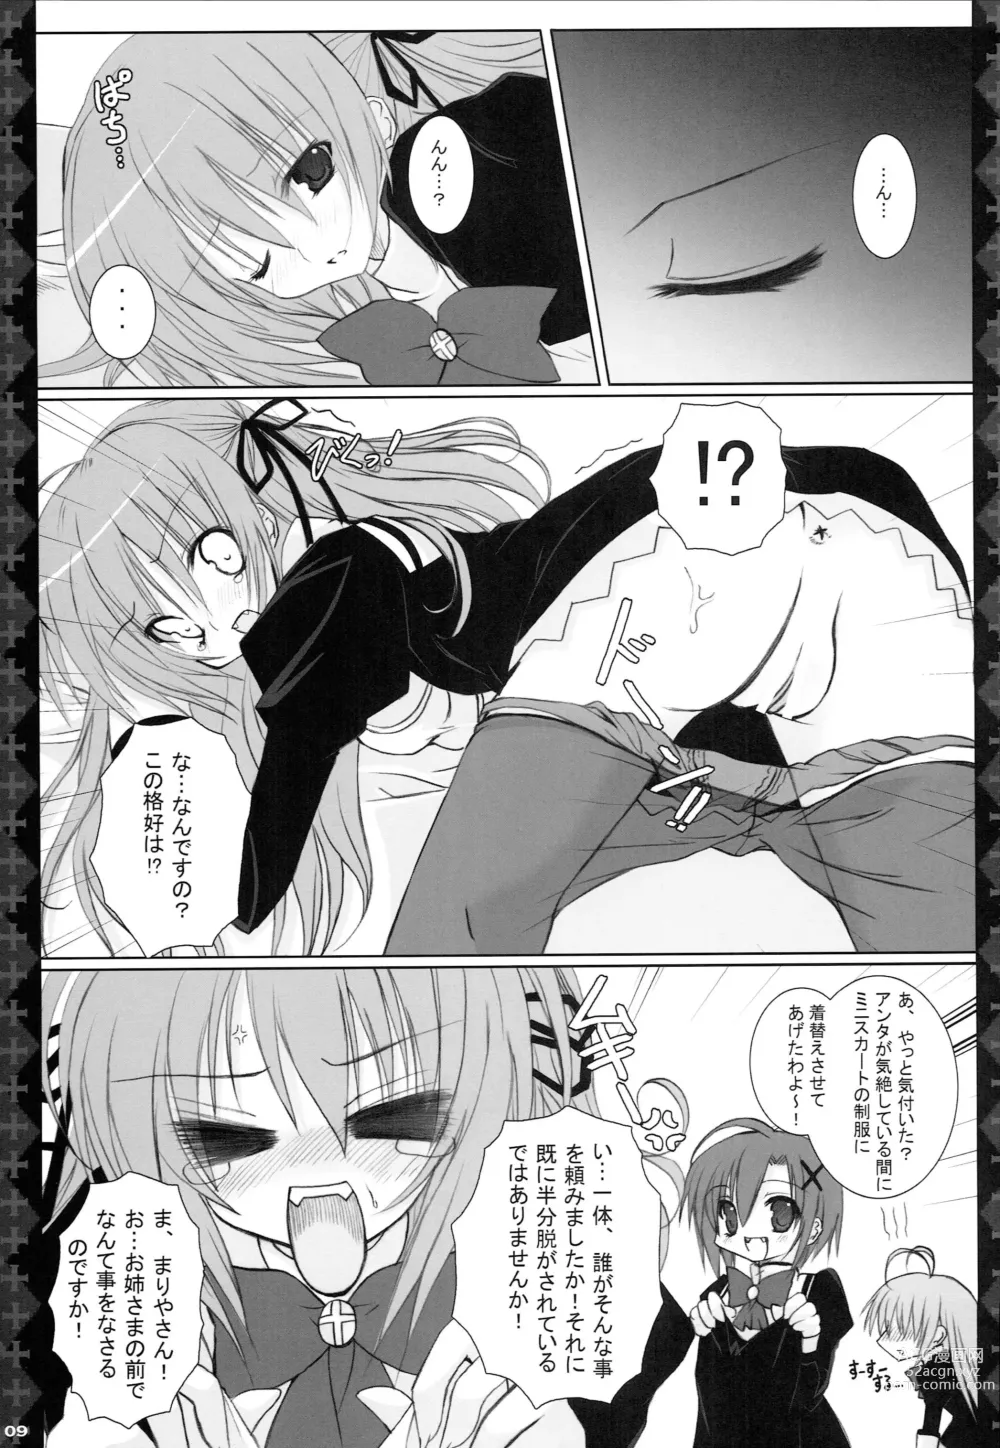 Page 8 of doujinshi Love Power.